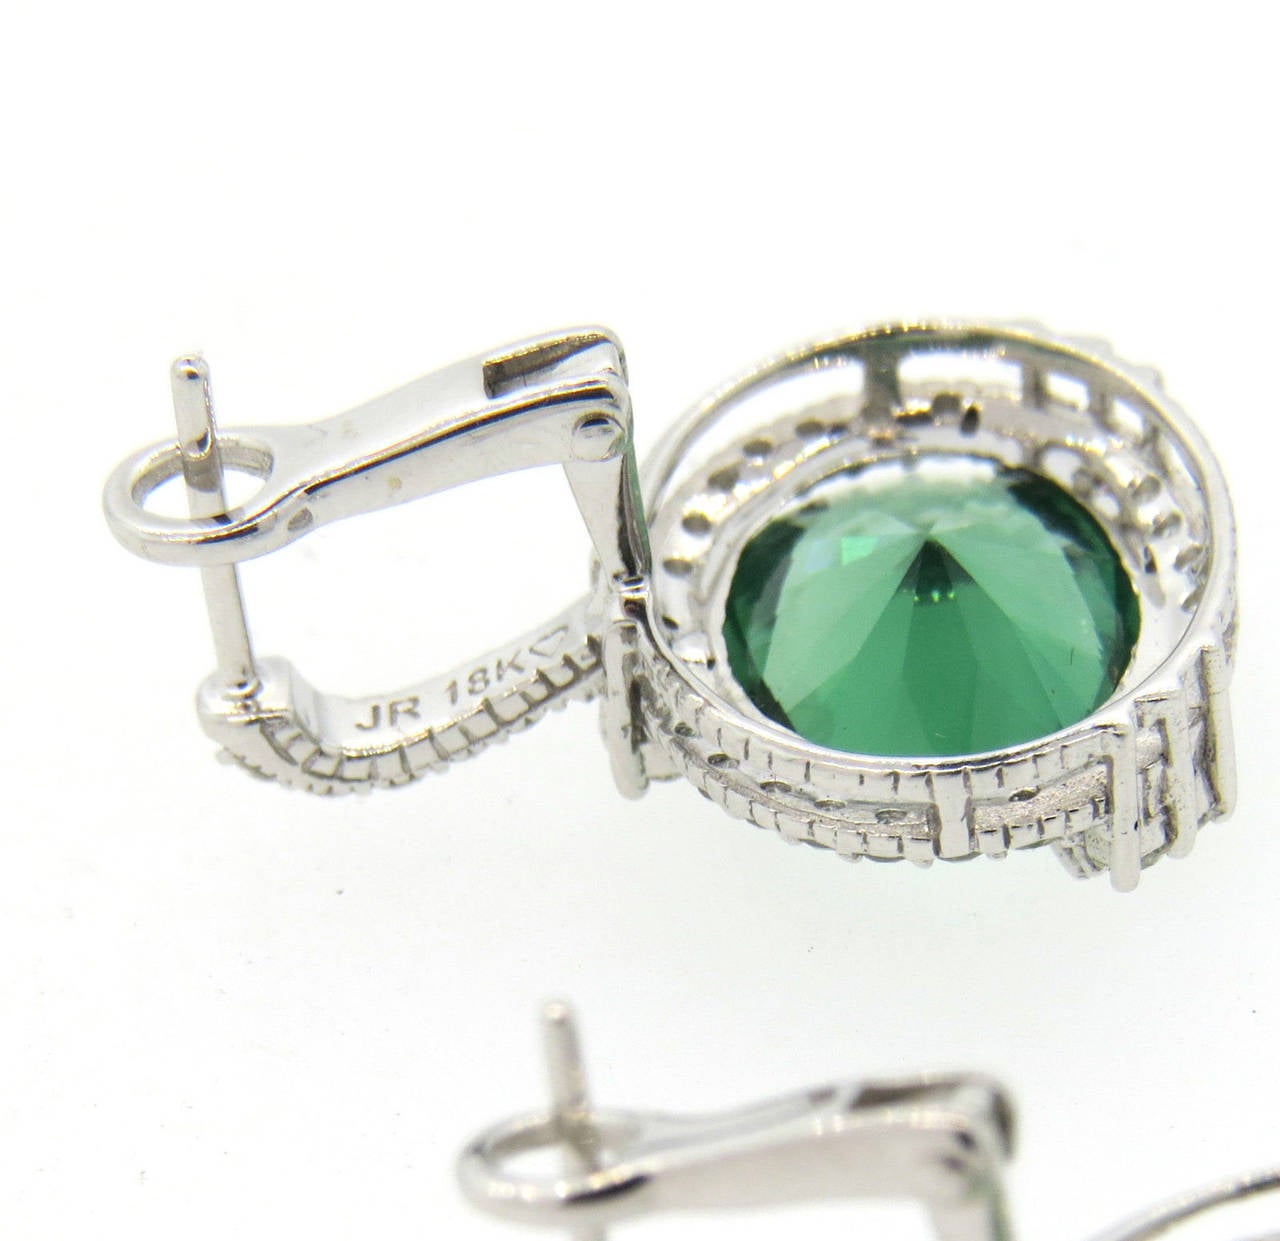 18k white gold earrings, crafted by Judith Ripka, featuring green quartz gemstones, surrounded with approximately 0.60ctw in diamonds. Earrings measure 22mm x 17mm. Marked 18k and JR. Weight - 6.3 grams